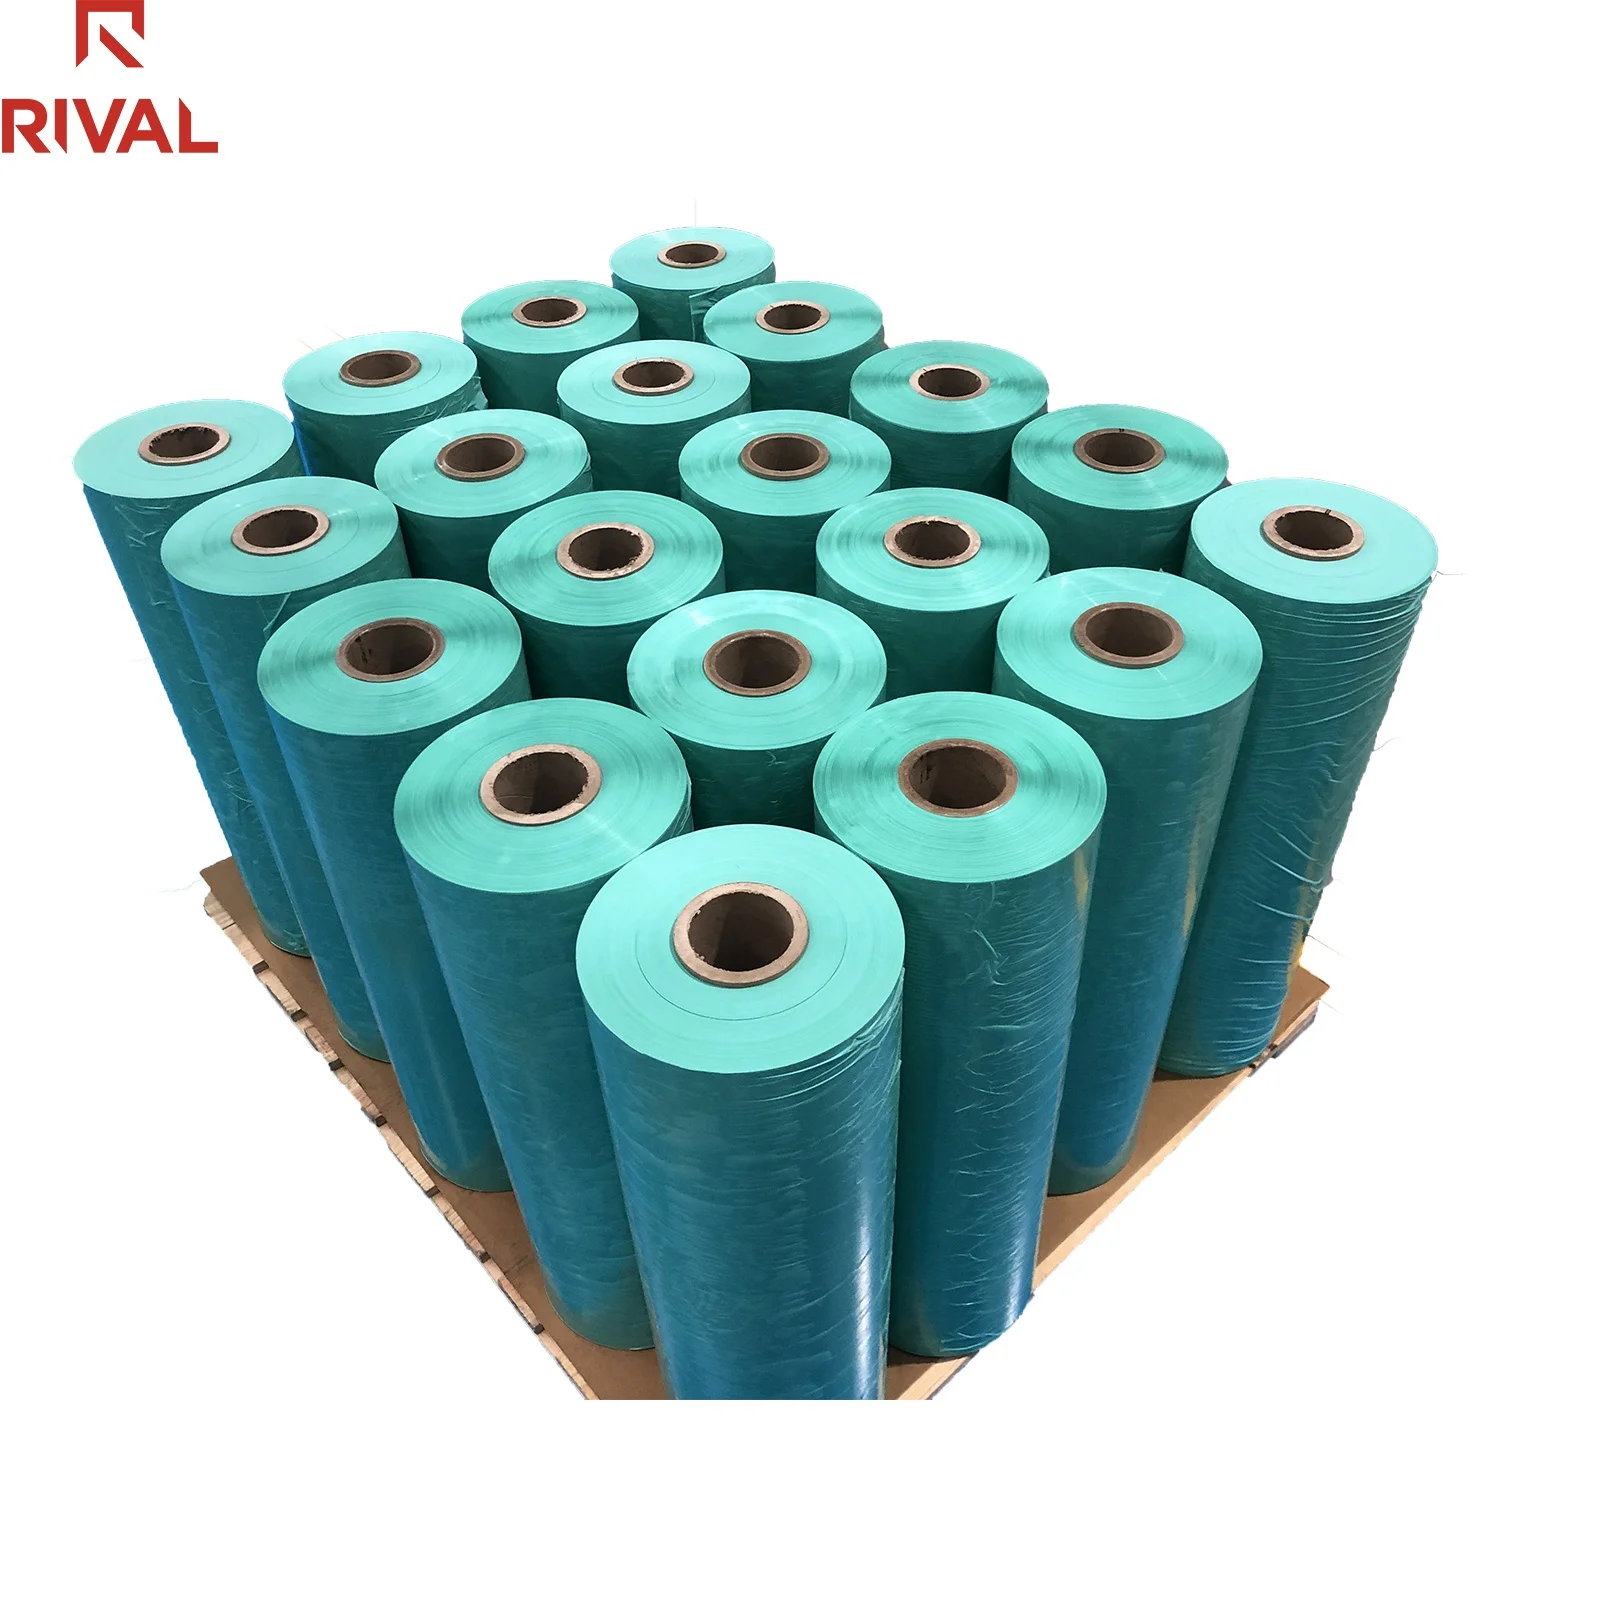 Agriculture Grass Wrap White/Black/Green 25Micron Supply UV Resistance Silage Wrap Film